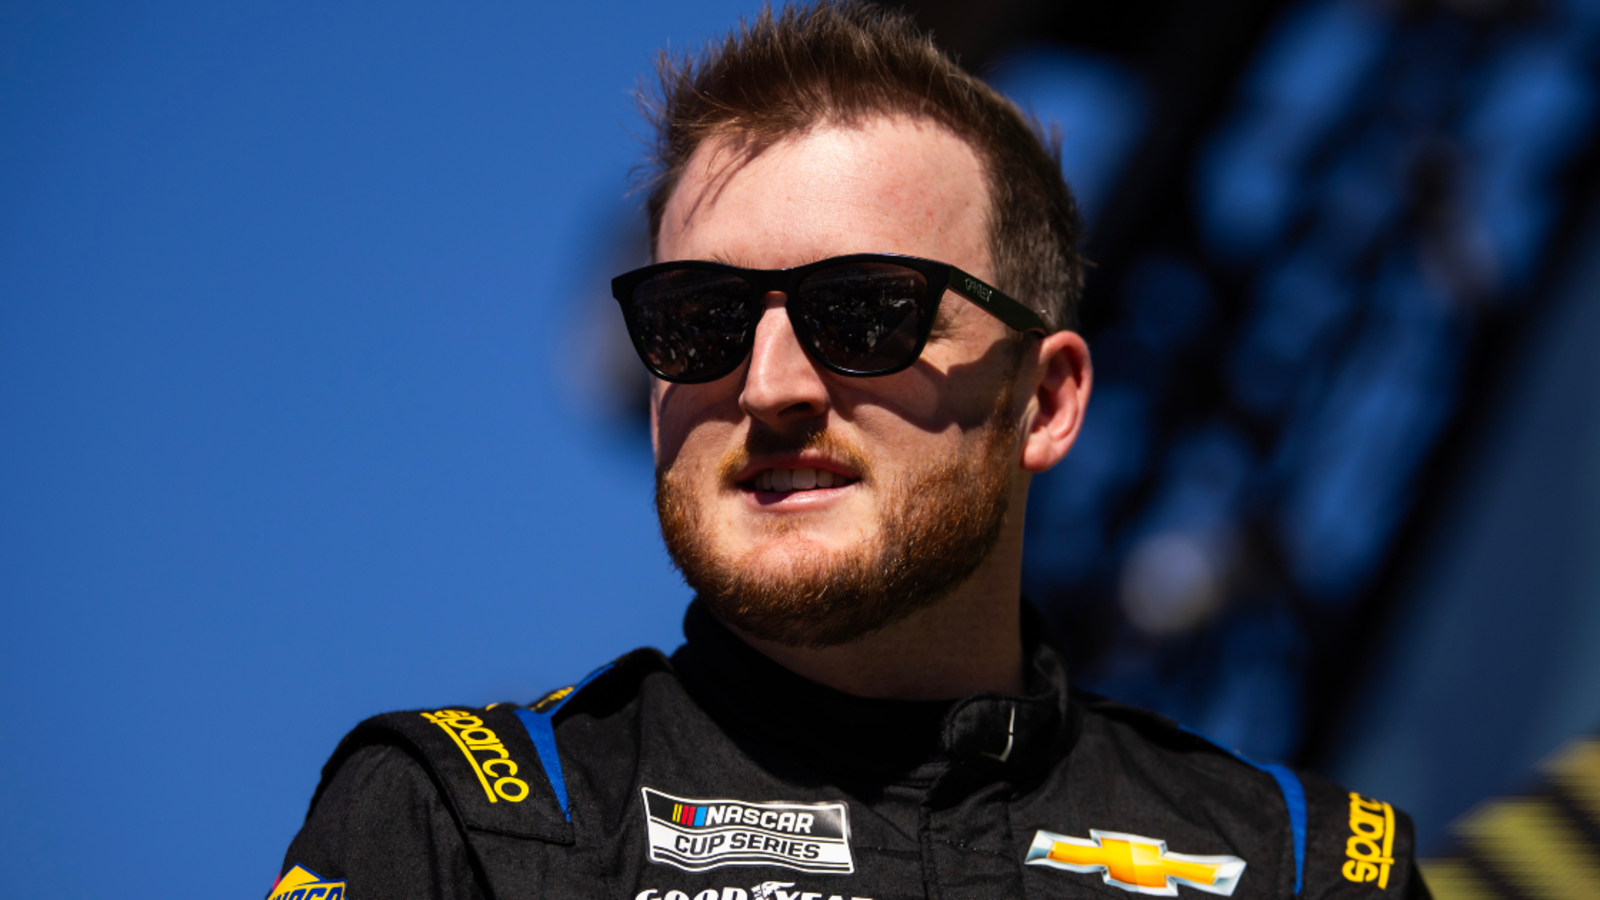 Ty Dillon joins Kaulig Racing for five race Cup Series schedule starting at Richmond